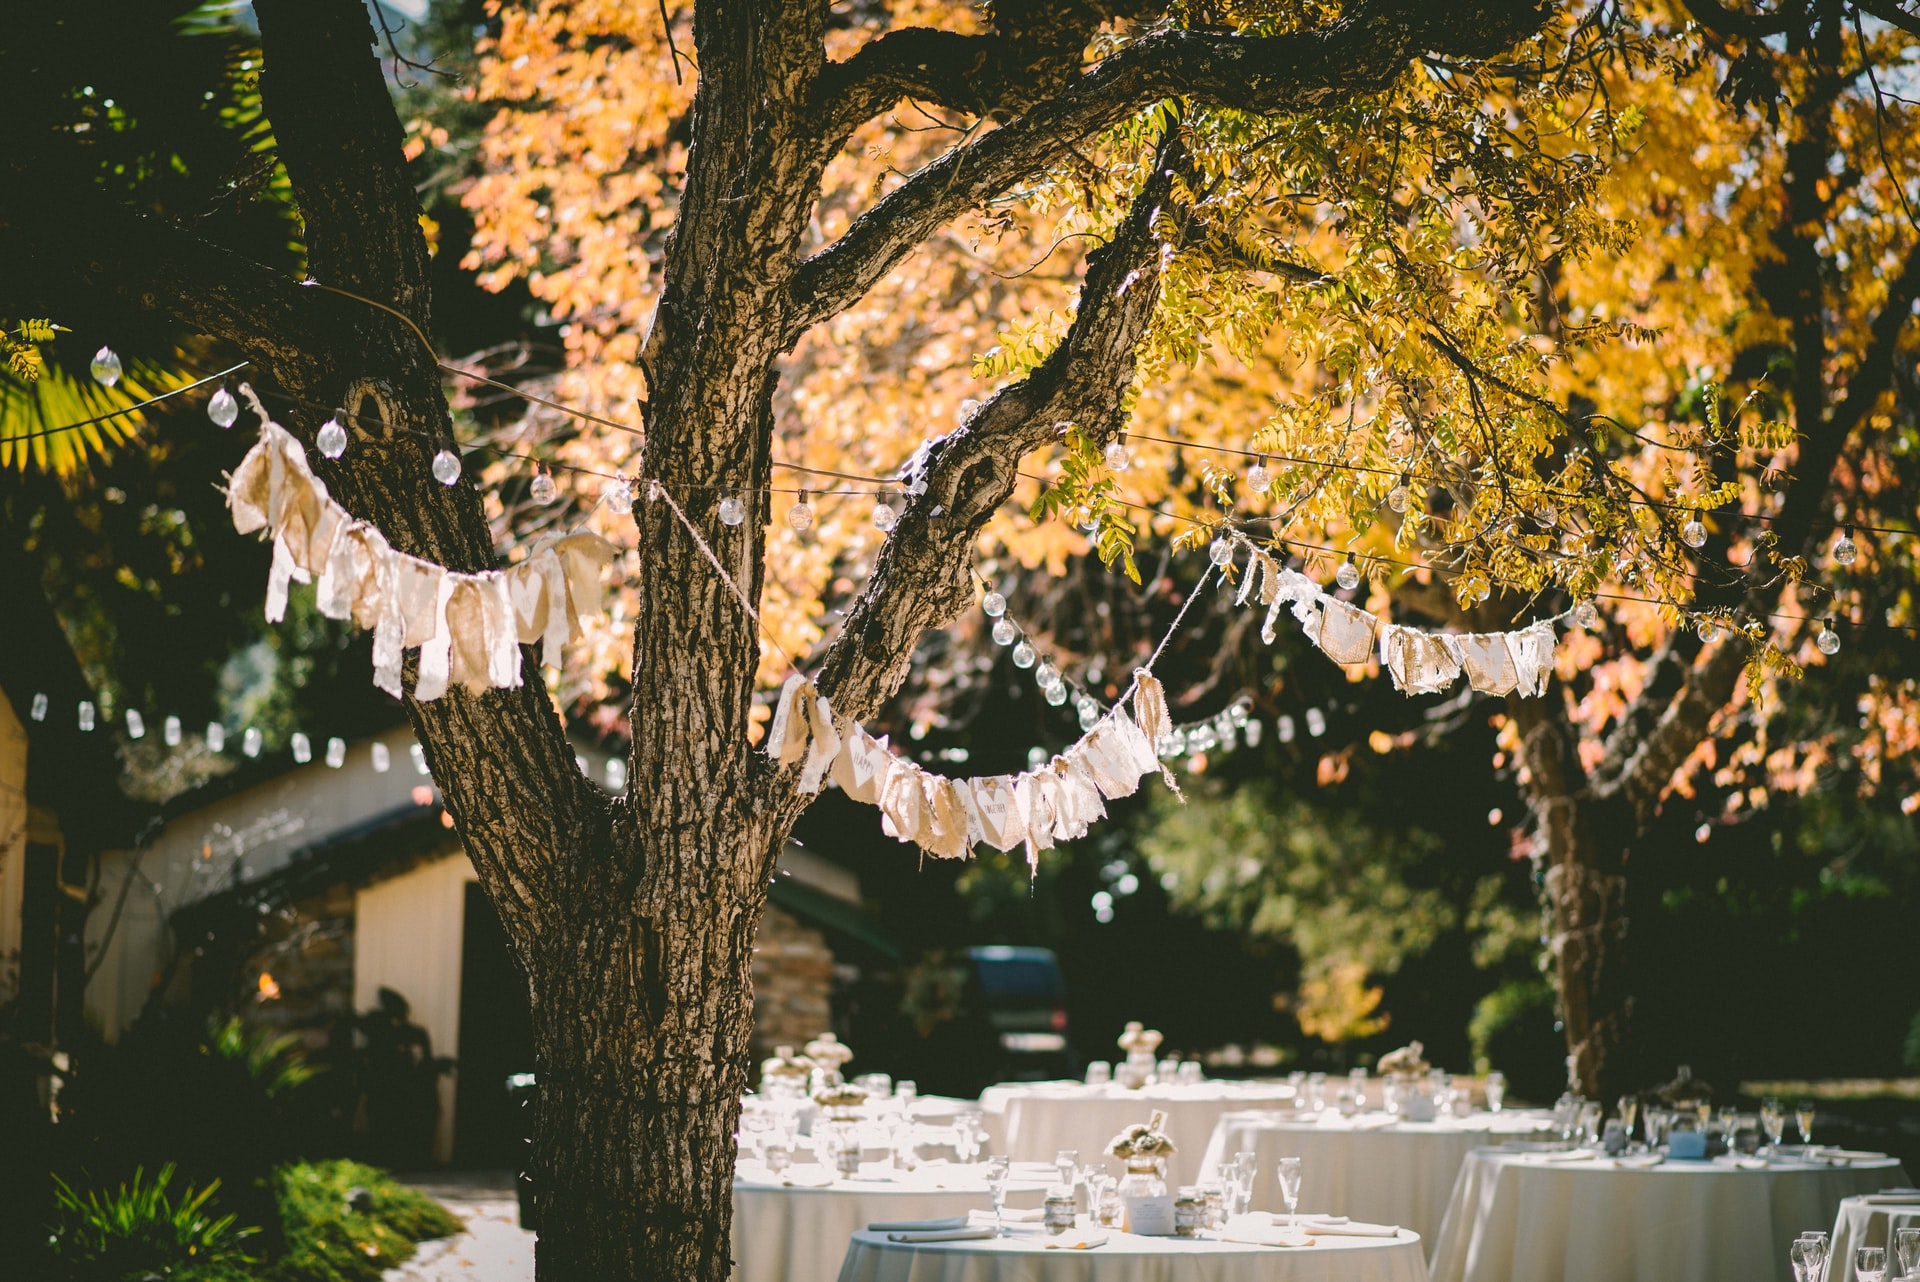 Garden party with fairy lights and white seating